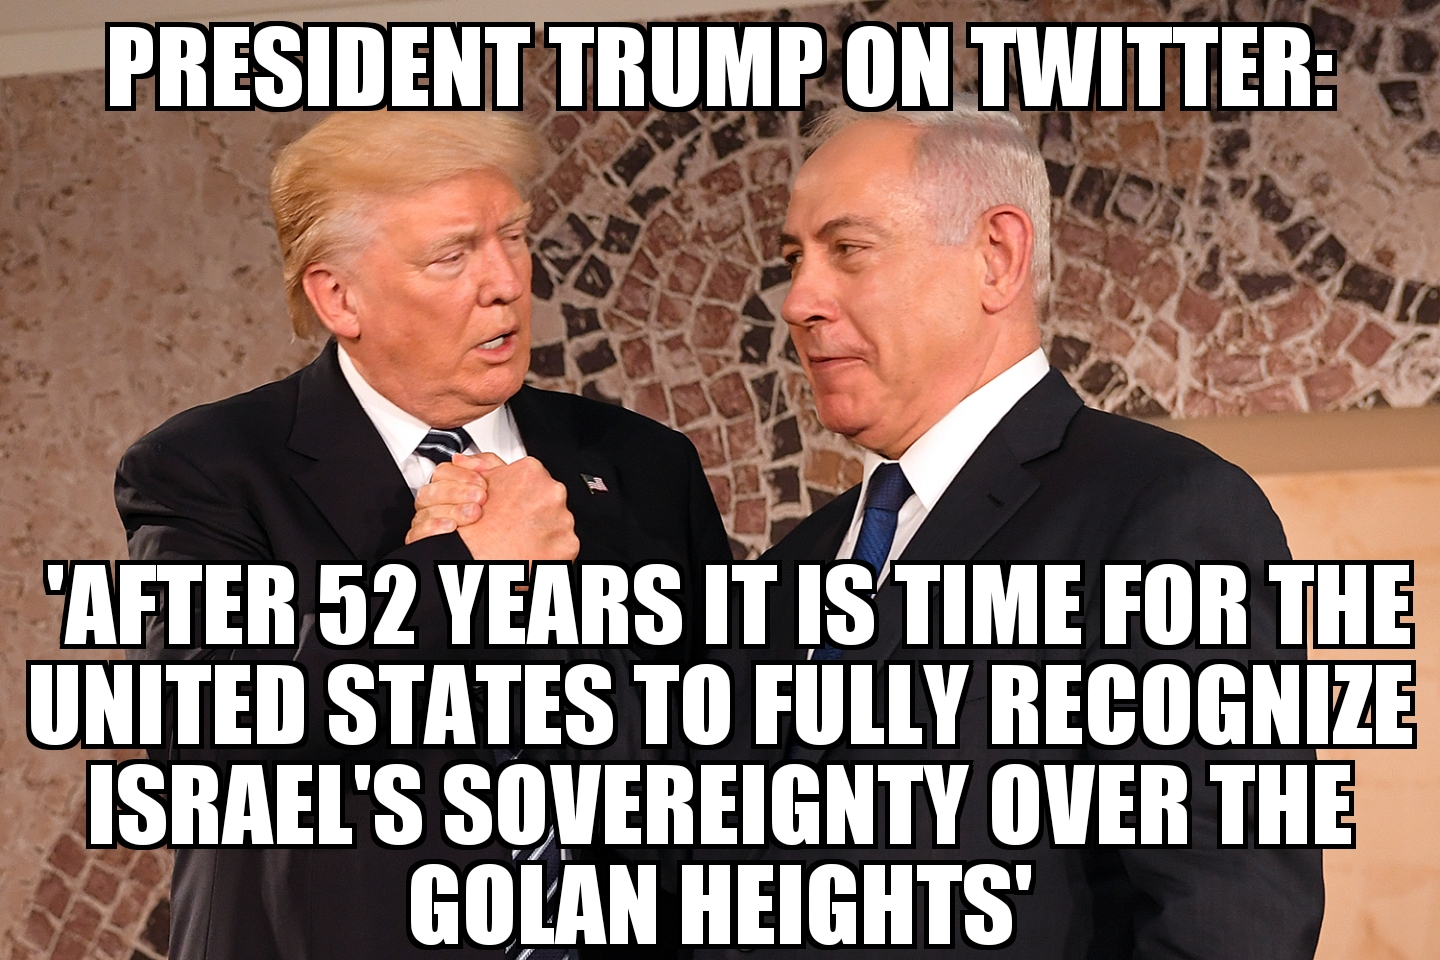 Trump on Twitter: U.S. should recognize Israel’s sovereignty over Golan Heights